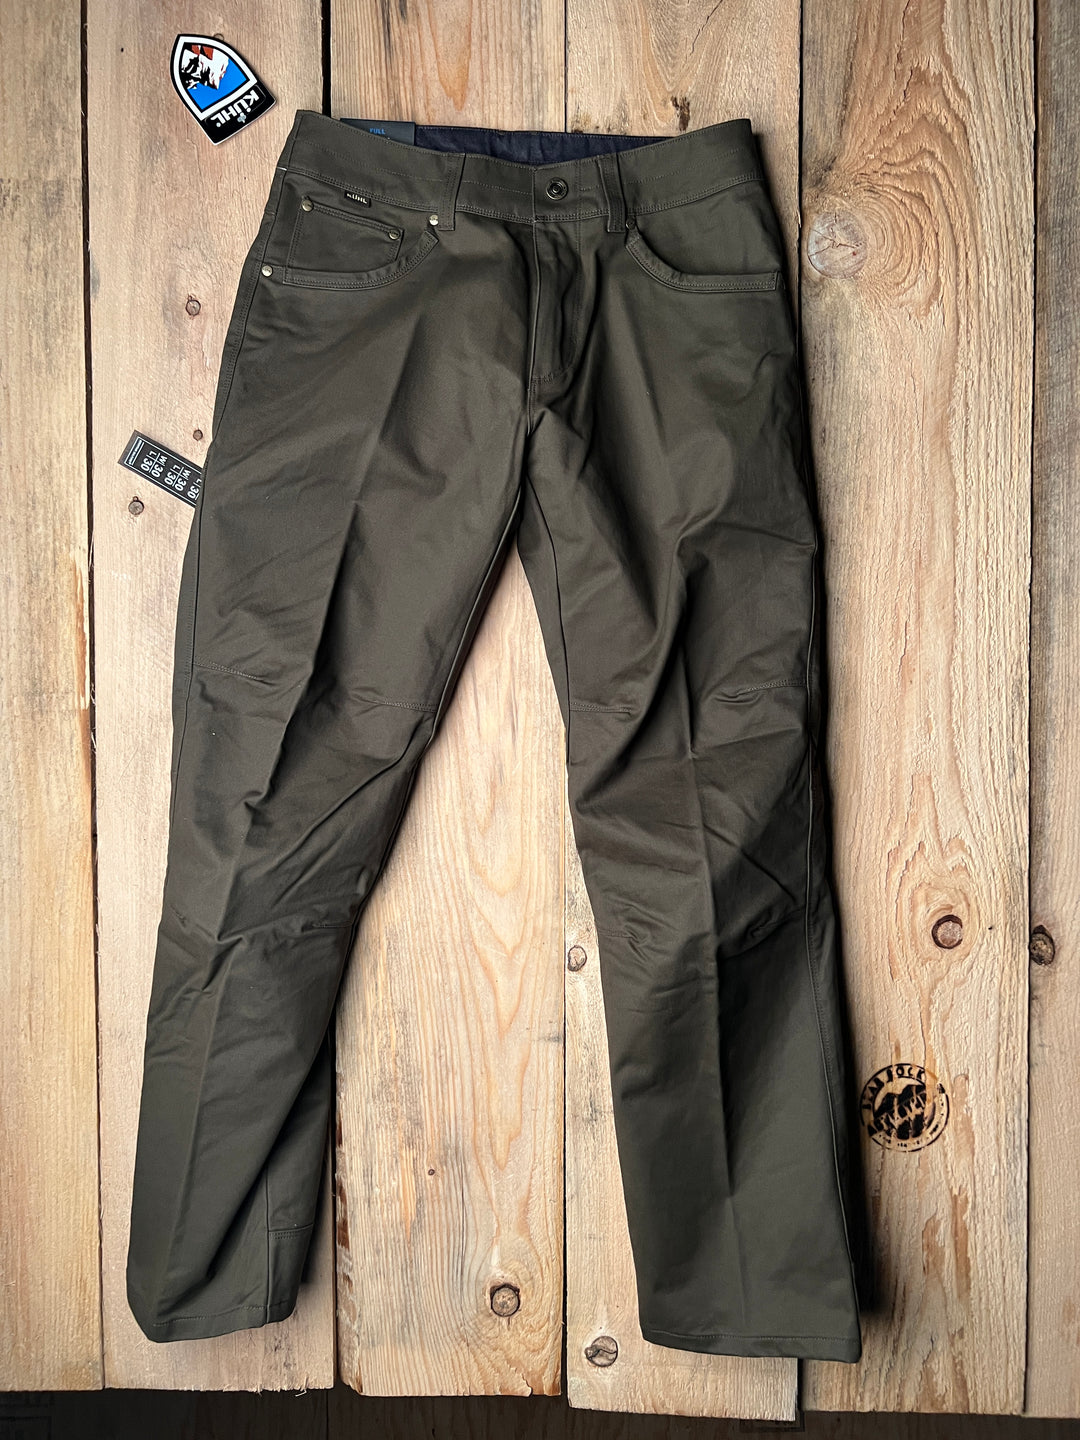 Kuhl M's Rydr Pant in Gunmetal